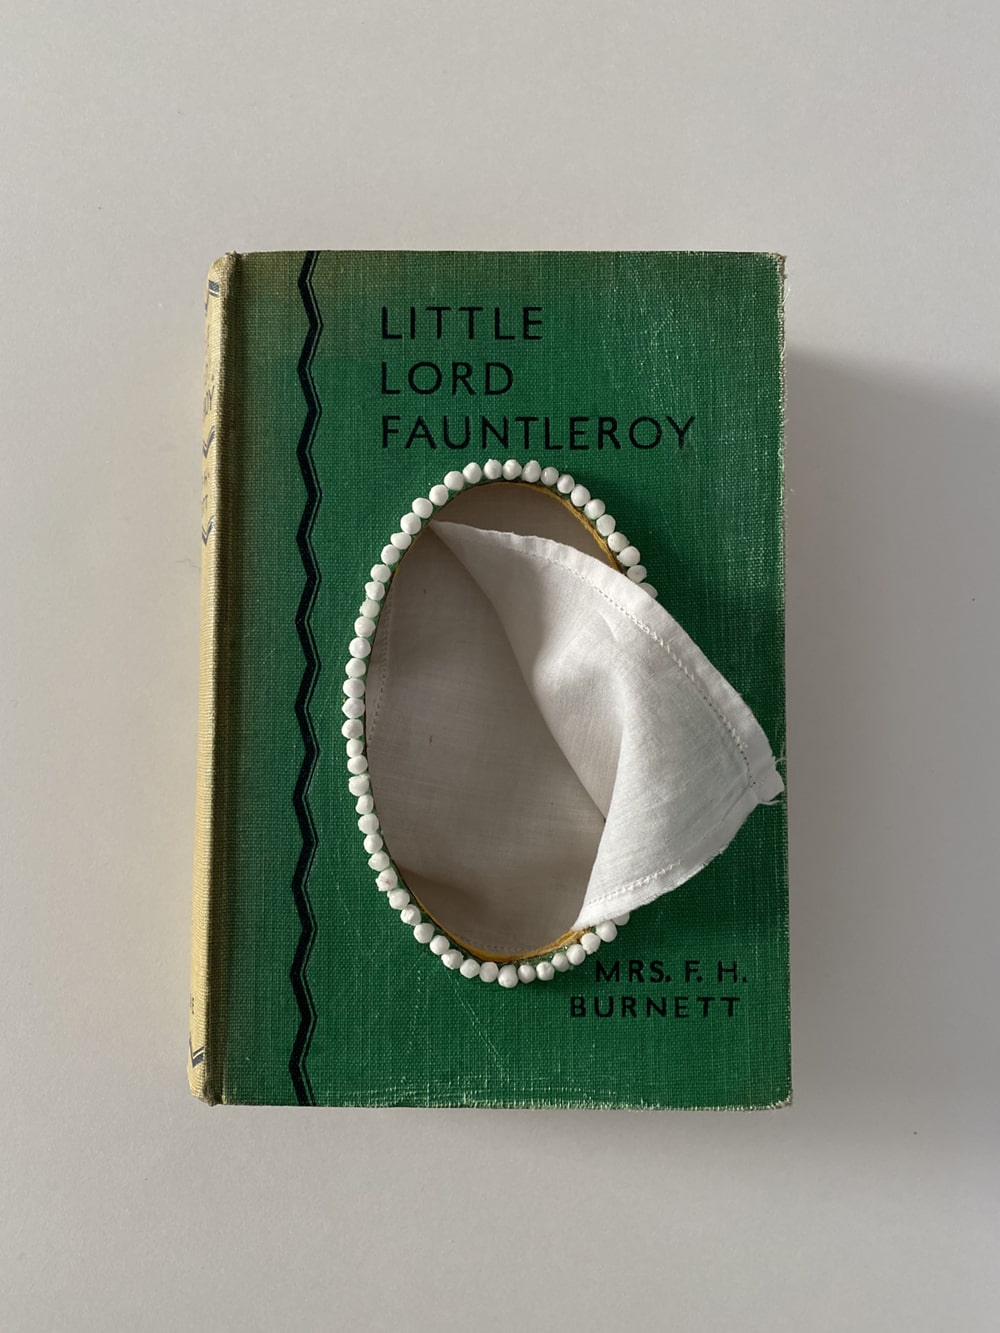 tissue book project Little Lord Fauntleroy